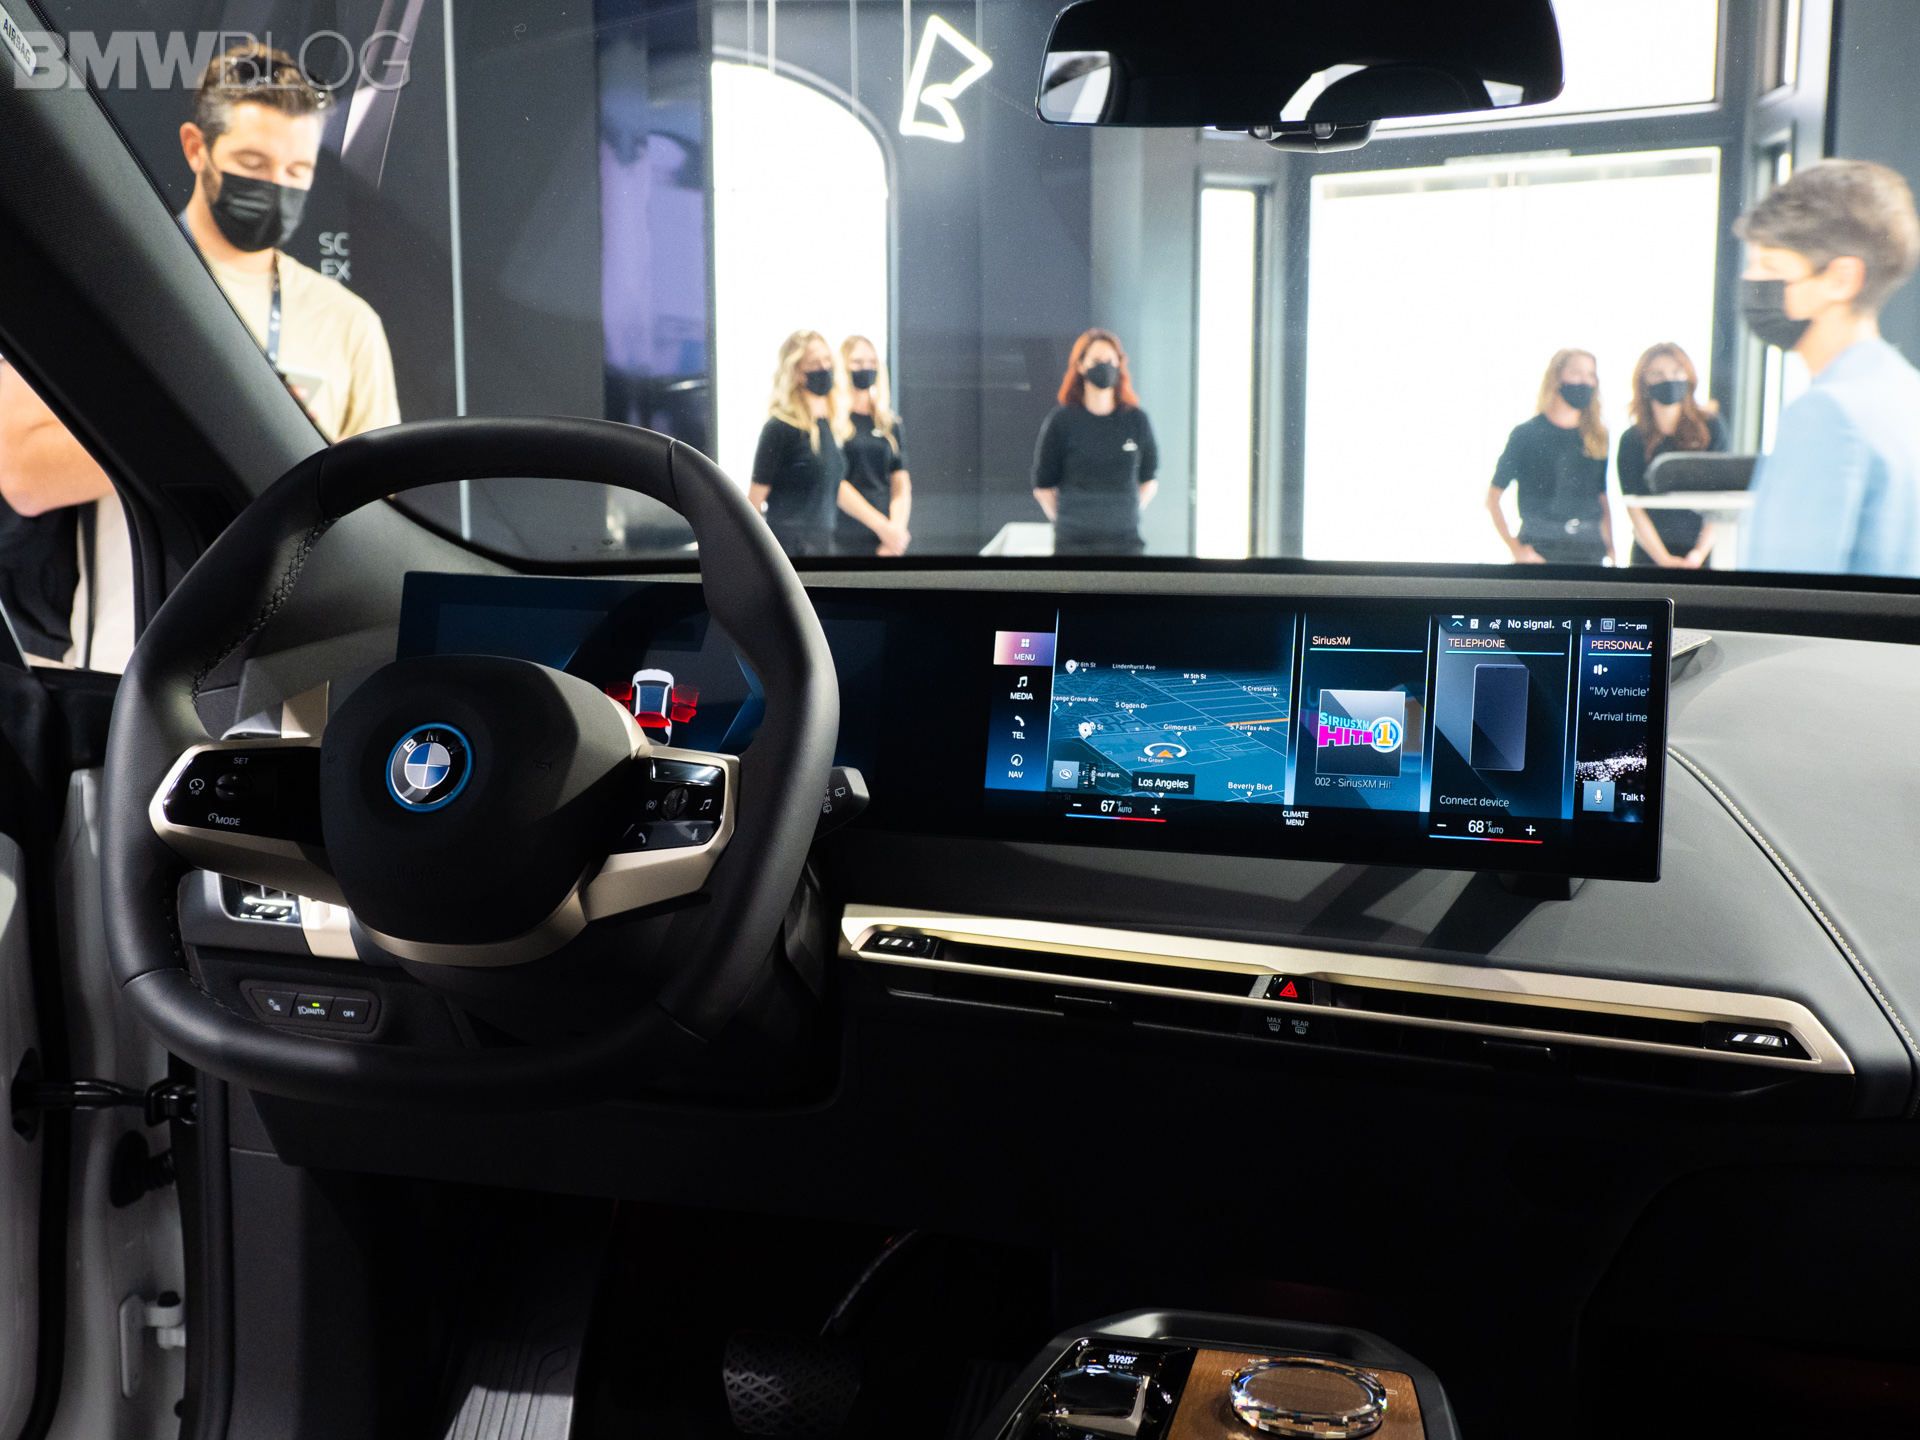 Here's What the BMW iX is Like in Person